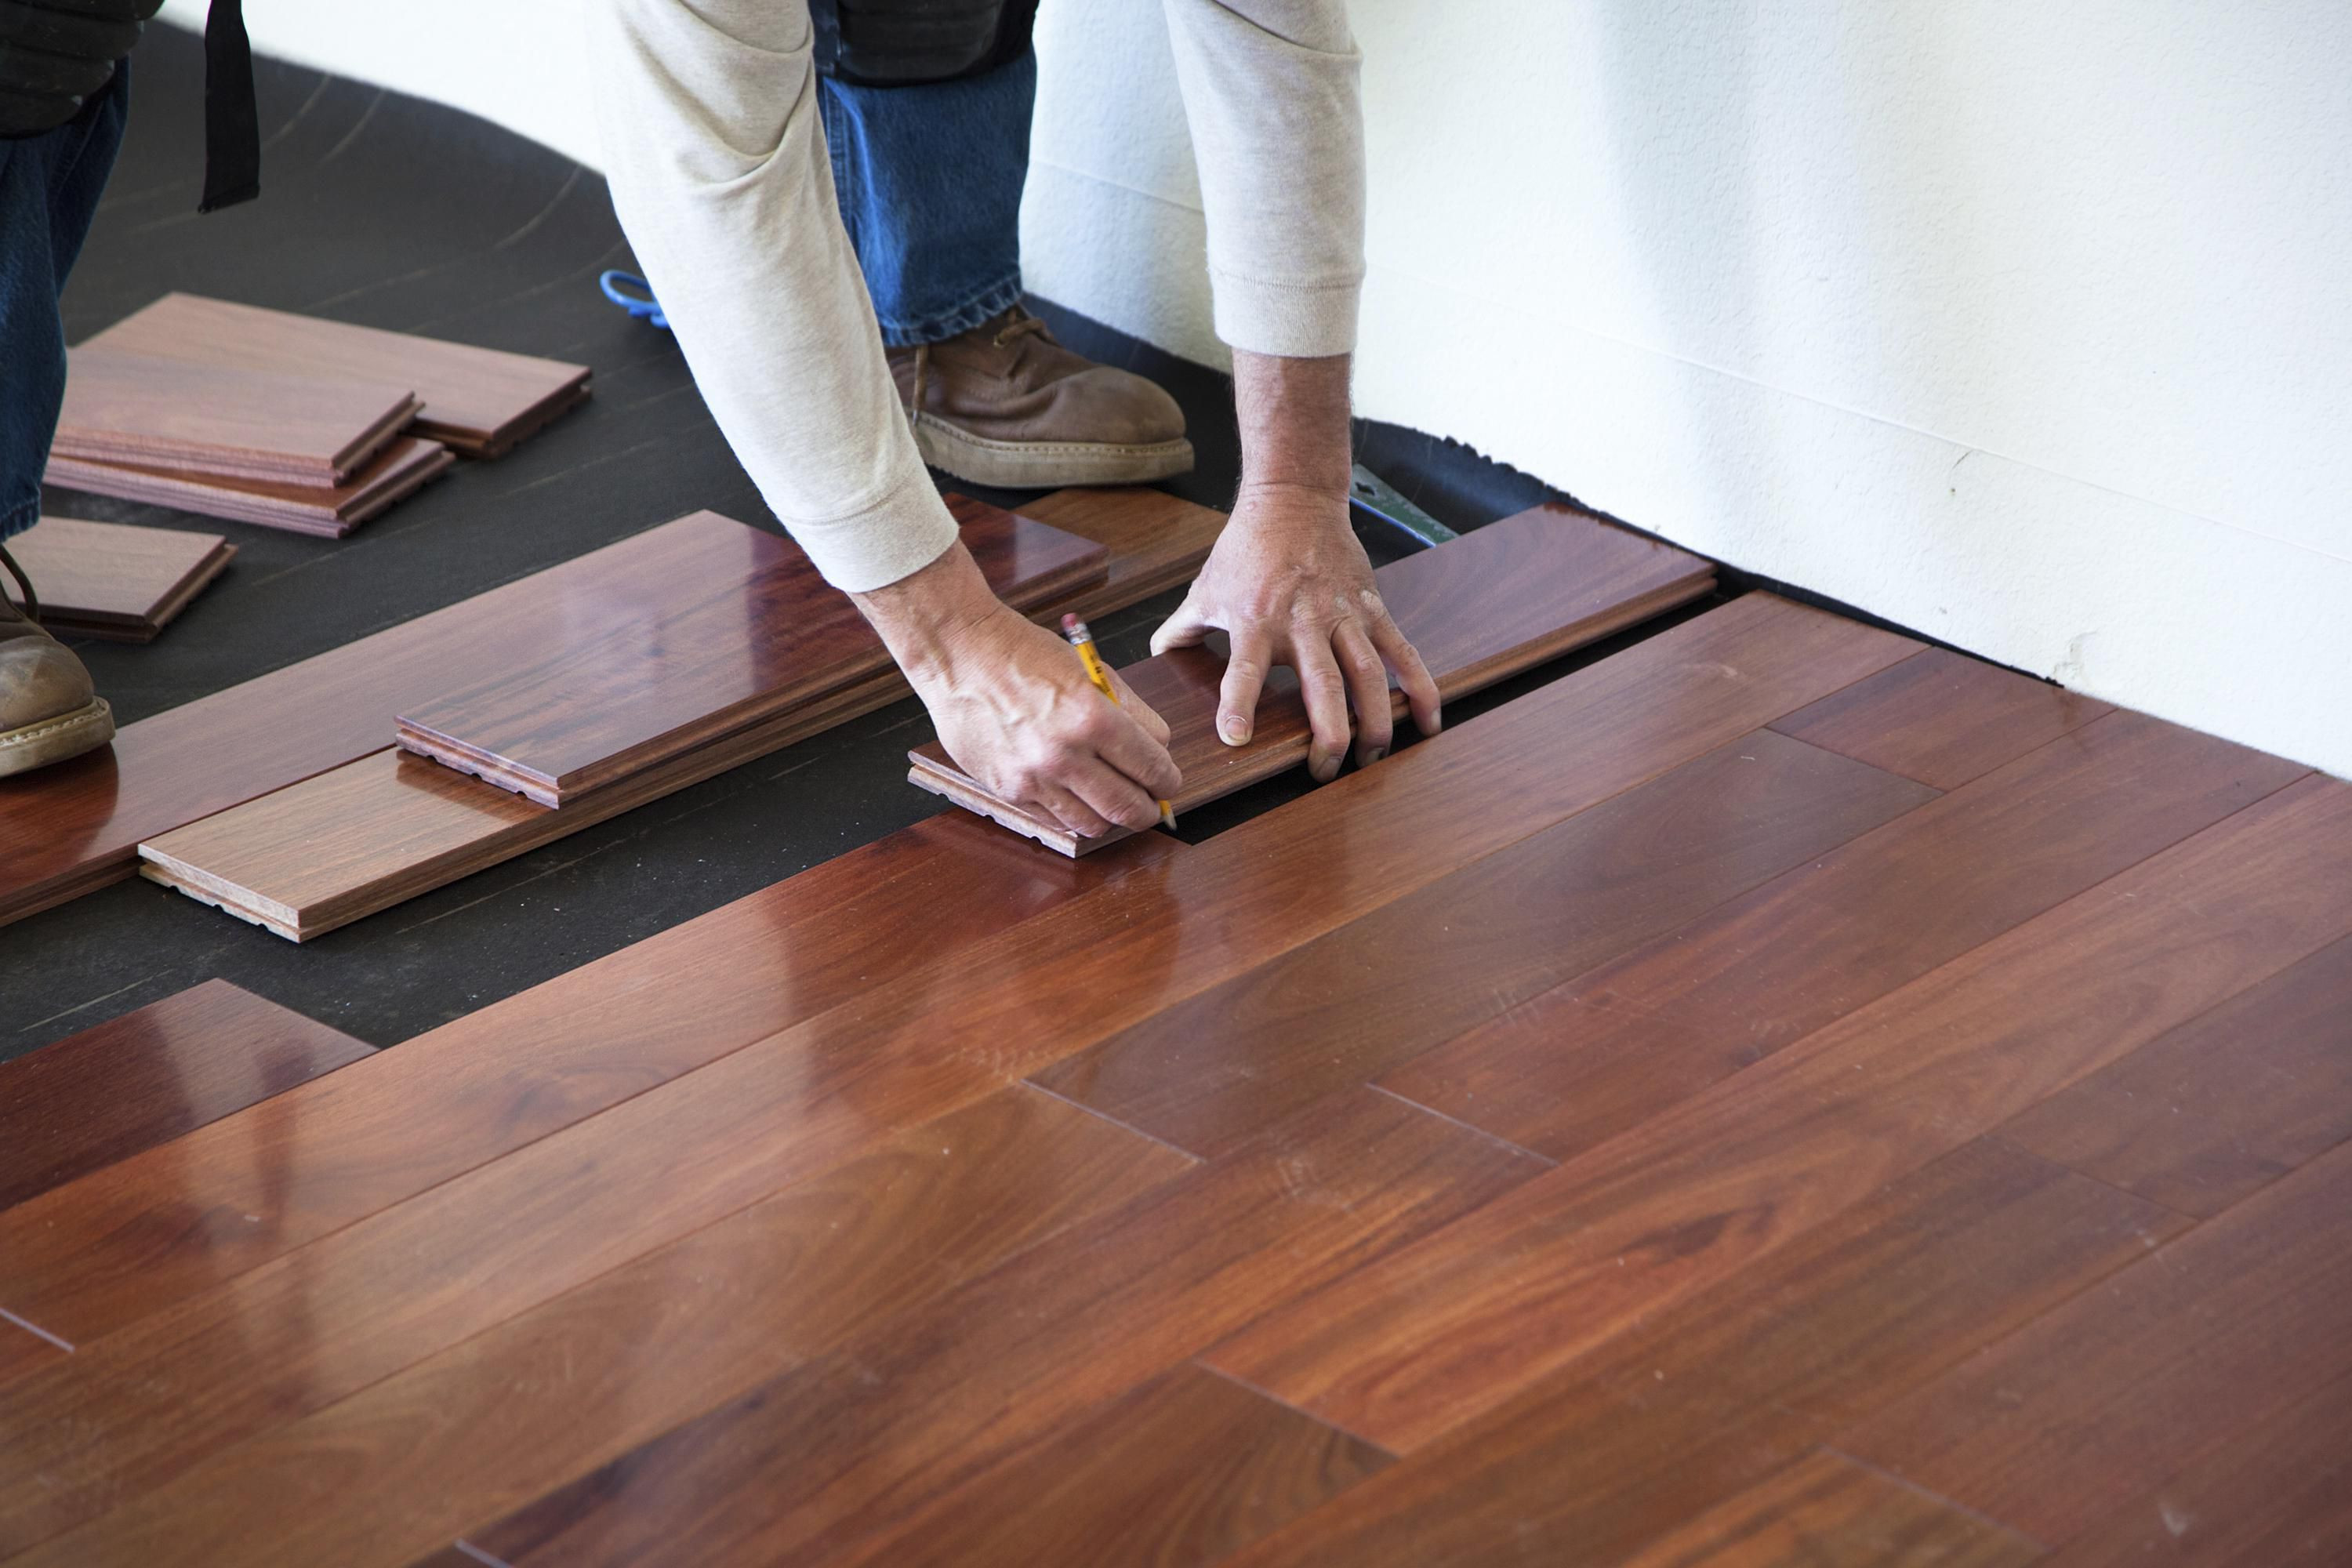 16 Awesome Cost to Sand and Stain Hardwood Floors 2022 free download cost to sand and stain hardwood floors of this is how much hardwood flooring to order with regard to 170040982 56a49f213df78cf772834e21